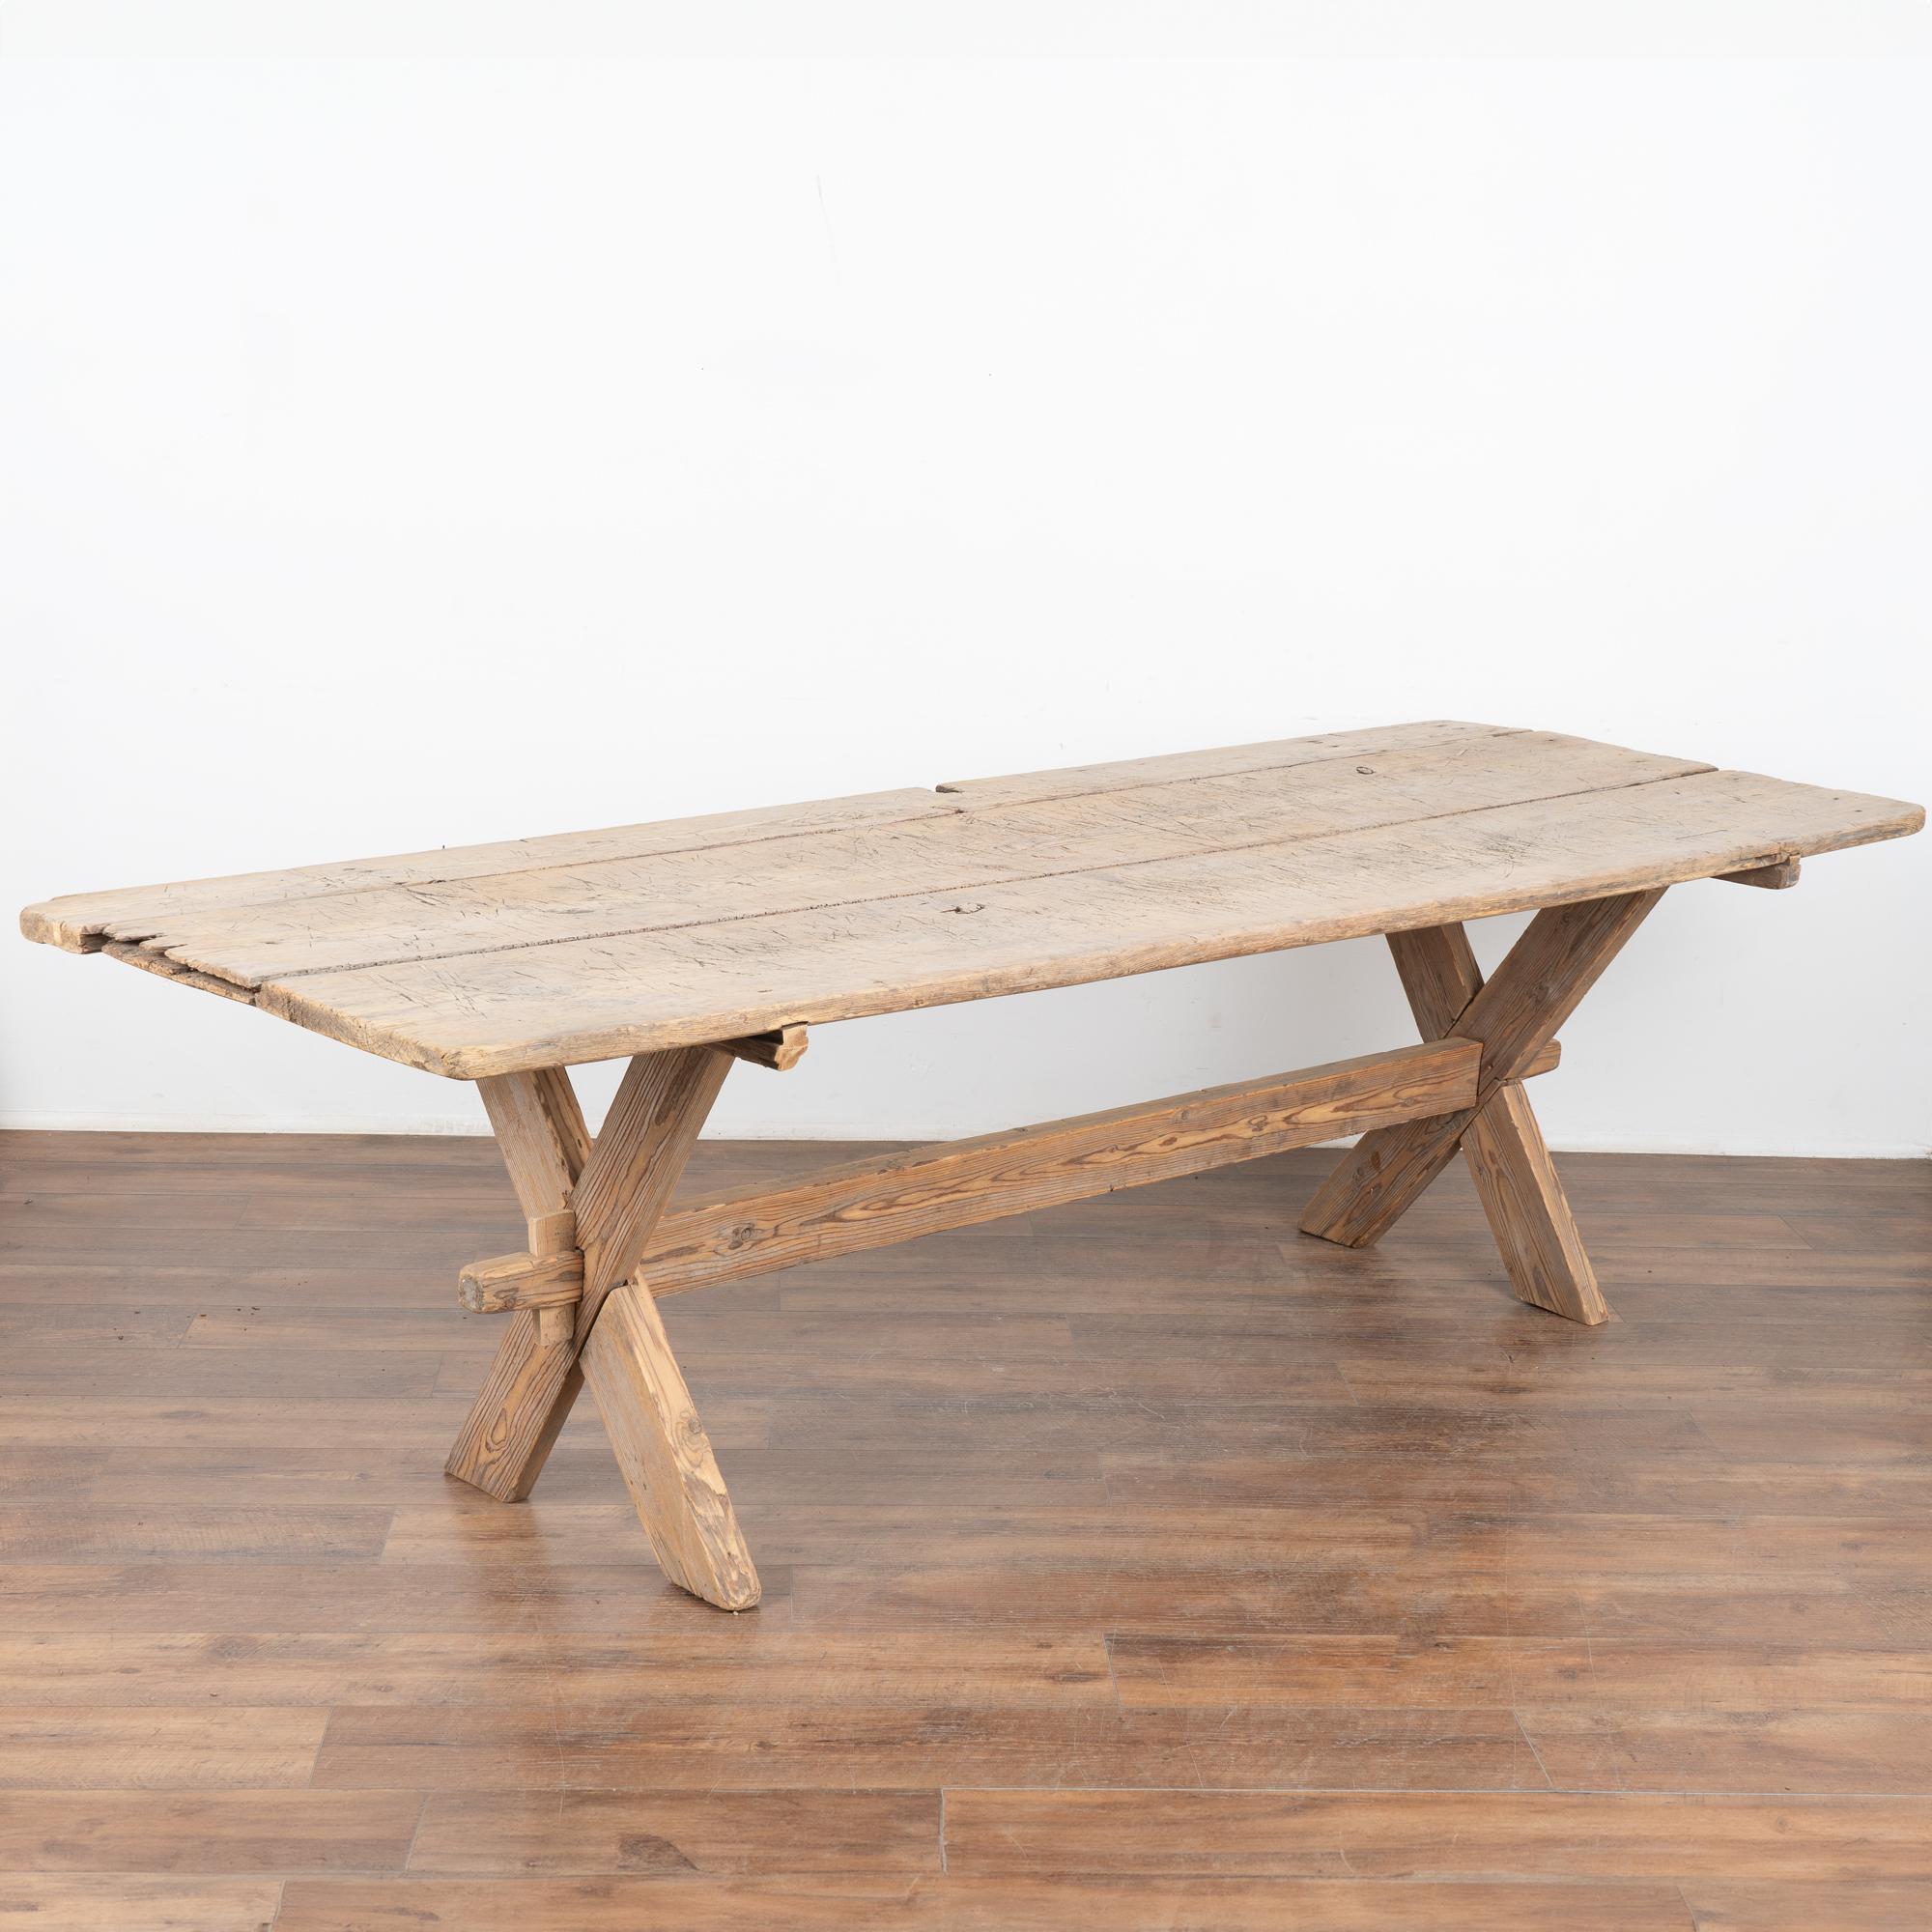 This farmhouse dining or kitchen table has European country charm thanks to the traditional X-stretcher base.
The natural pine has been distressed through generations of use, adding a weathered depth to the character of the table. The many